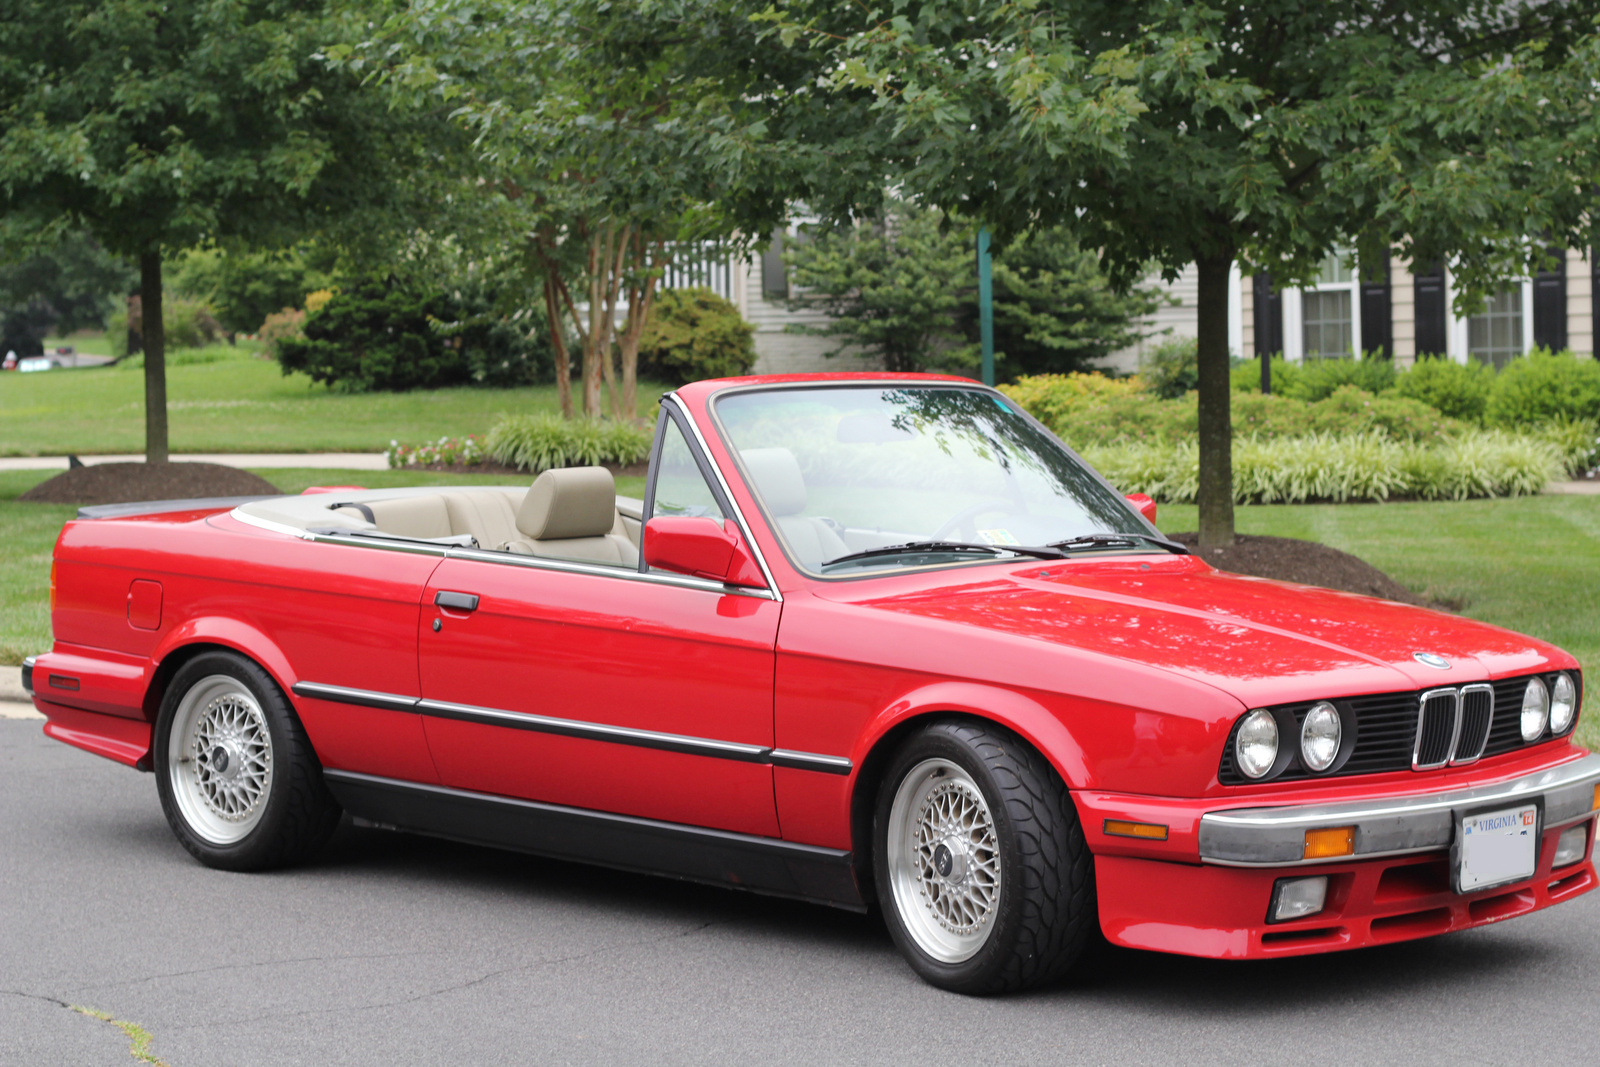 1987 Bmw 325i convertible review #2